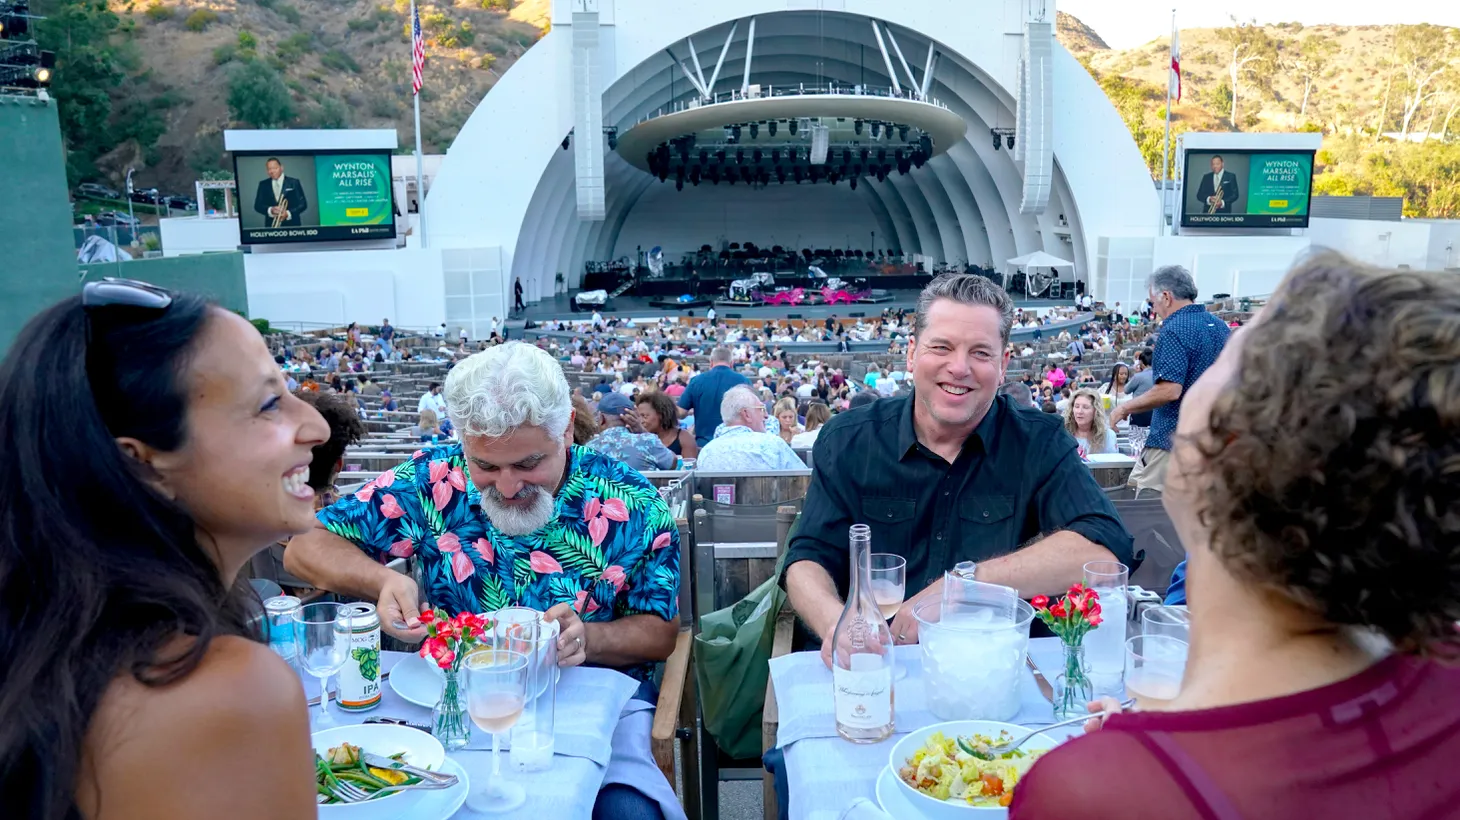 Dining in a box at The Hollywood Bowl is a quintessential LA summer experience.